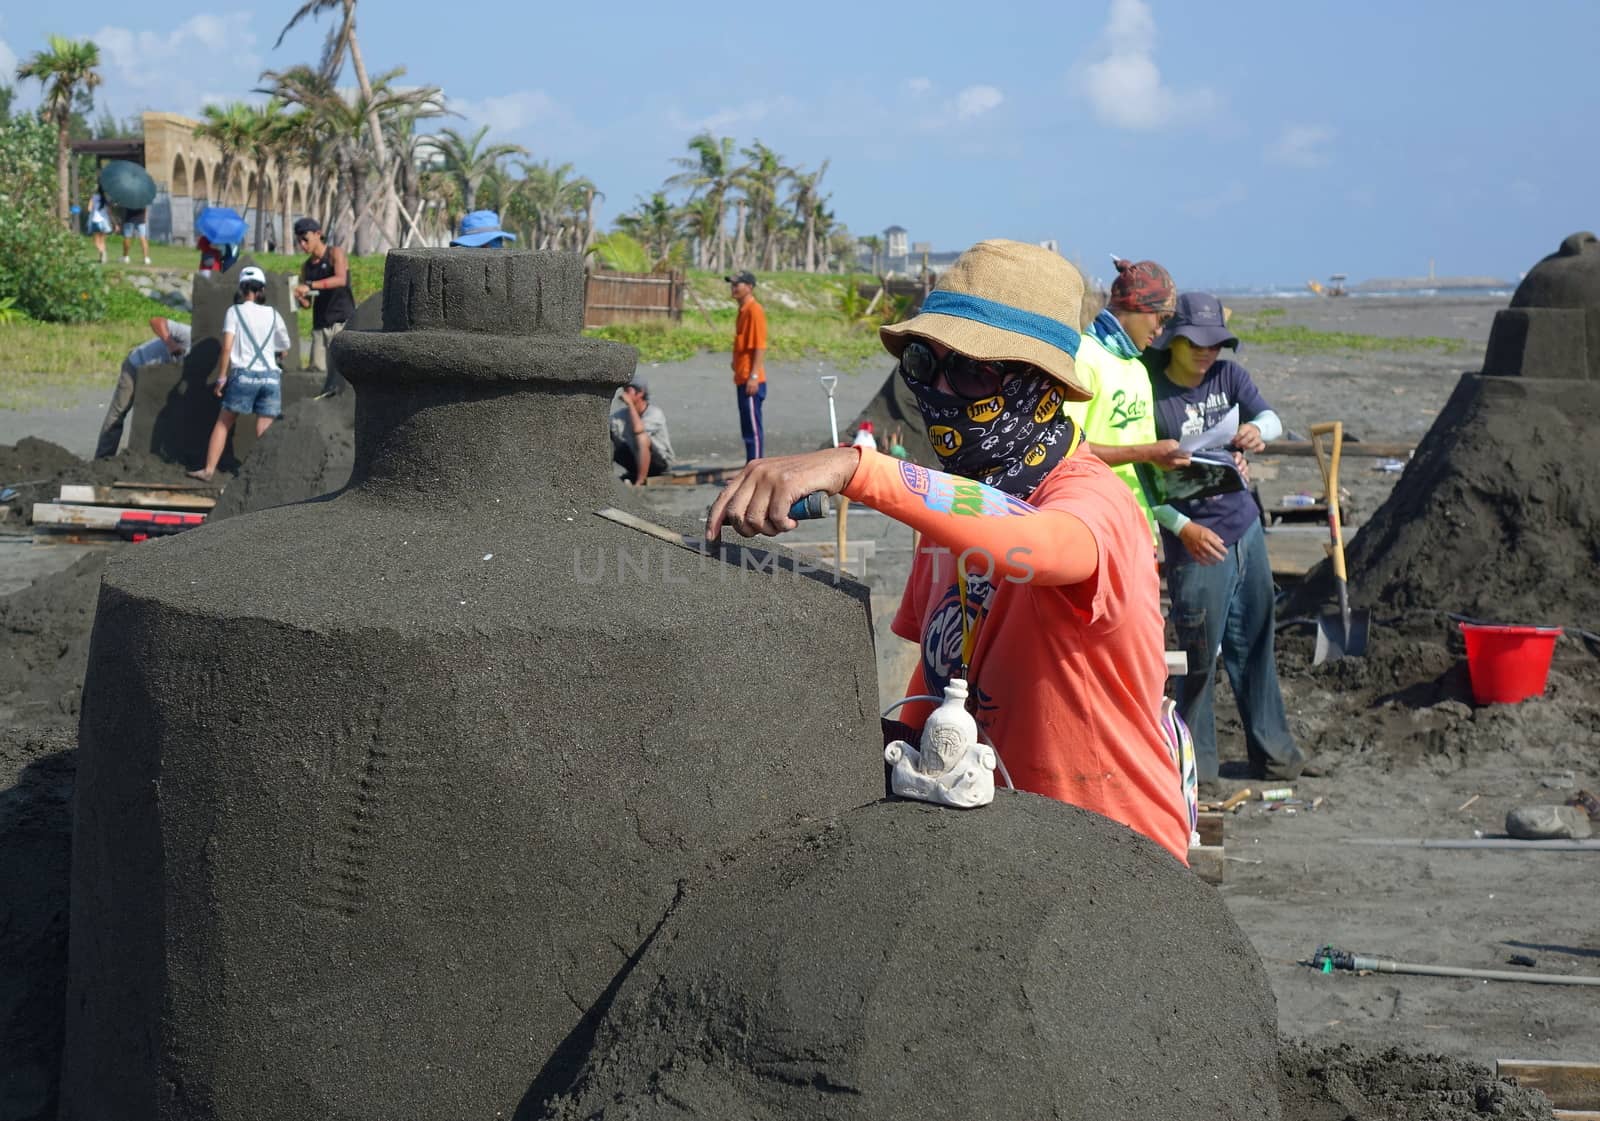 KAOHSIUNG, TAIWAN -- AUGUST 5, 2017: Artists work on sand sculptures at the 2017 Black Sand Beach festival on Chijin Island.